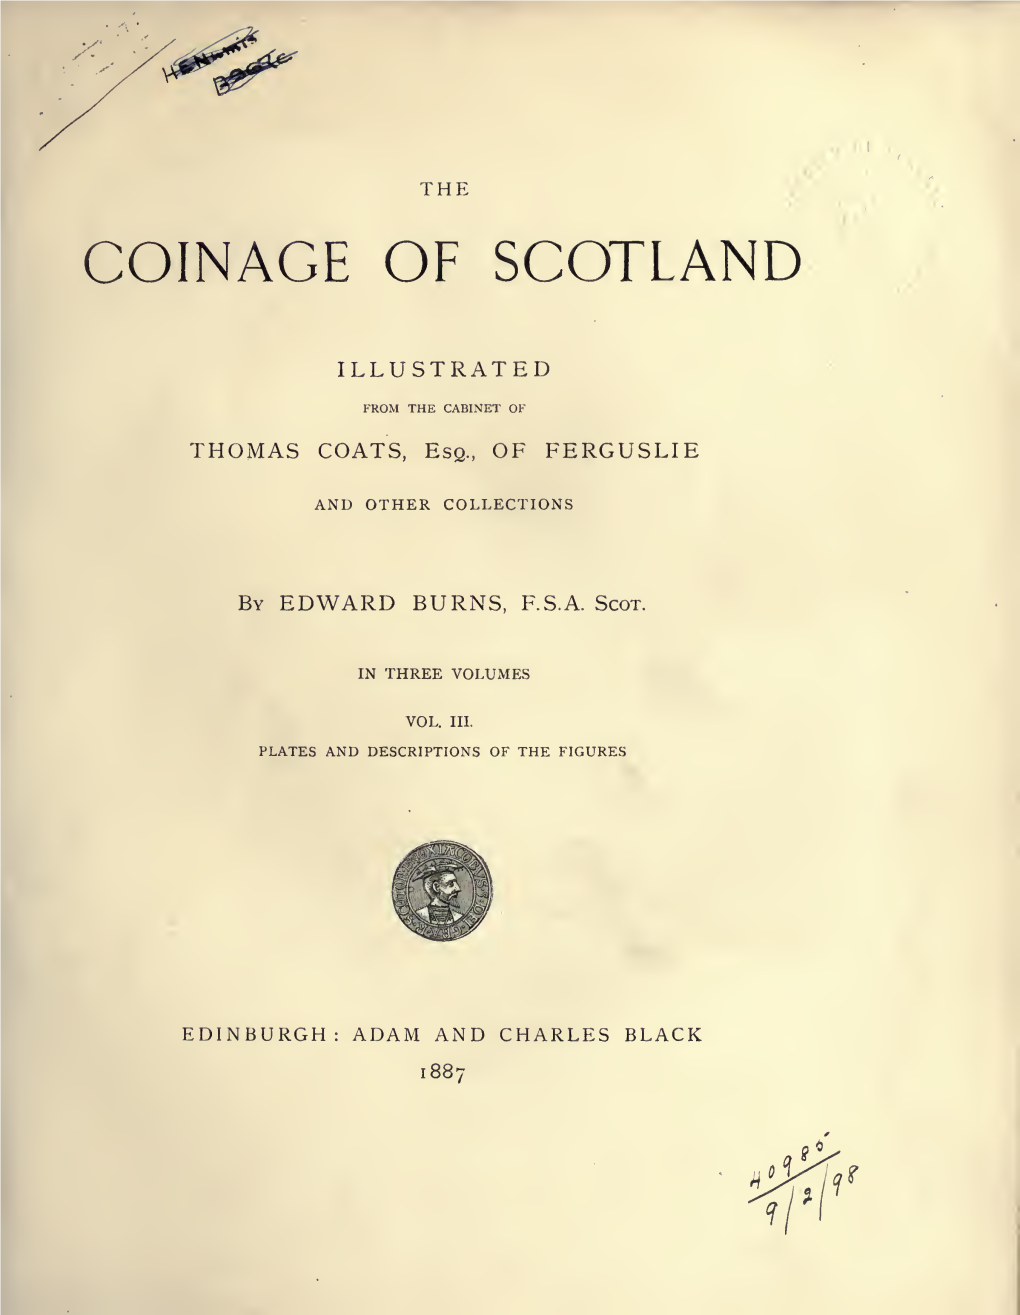 The Coinage of Scotland